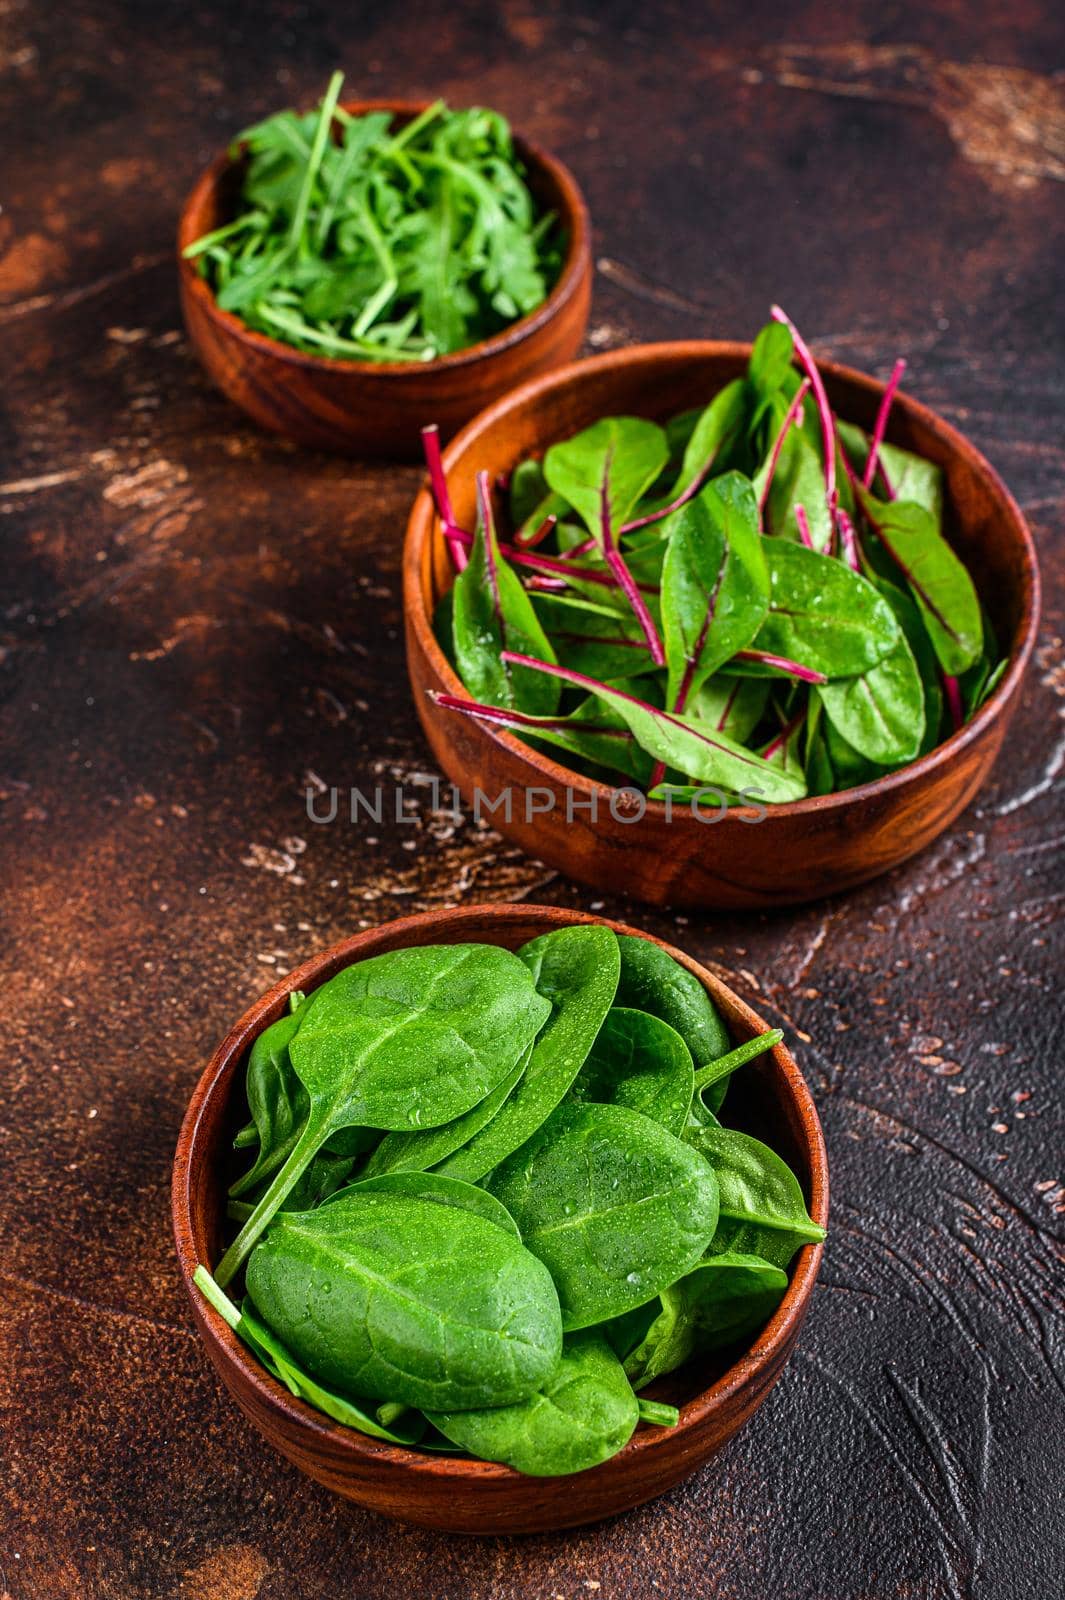 Mix Salad leafs, Arugula, Spinach and swiis Chard in wooden bowls. Dark background. Top view by Composter